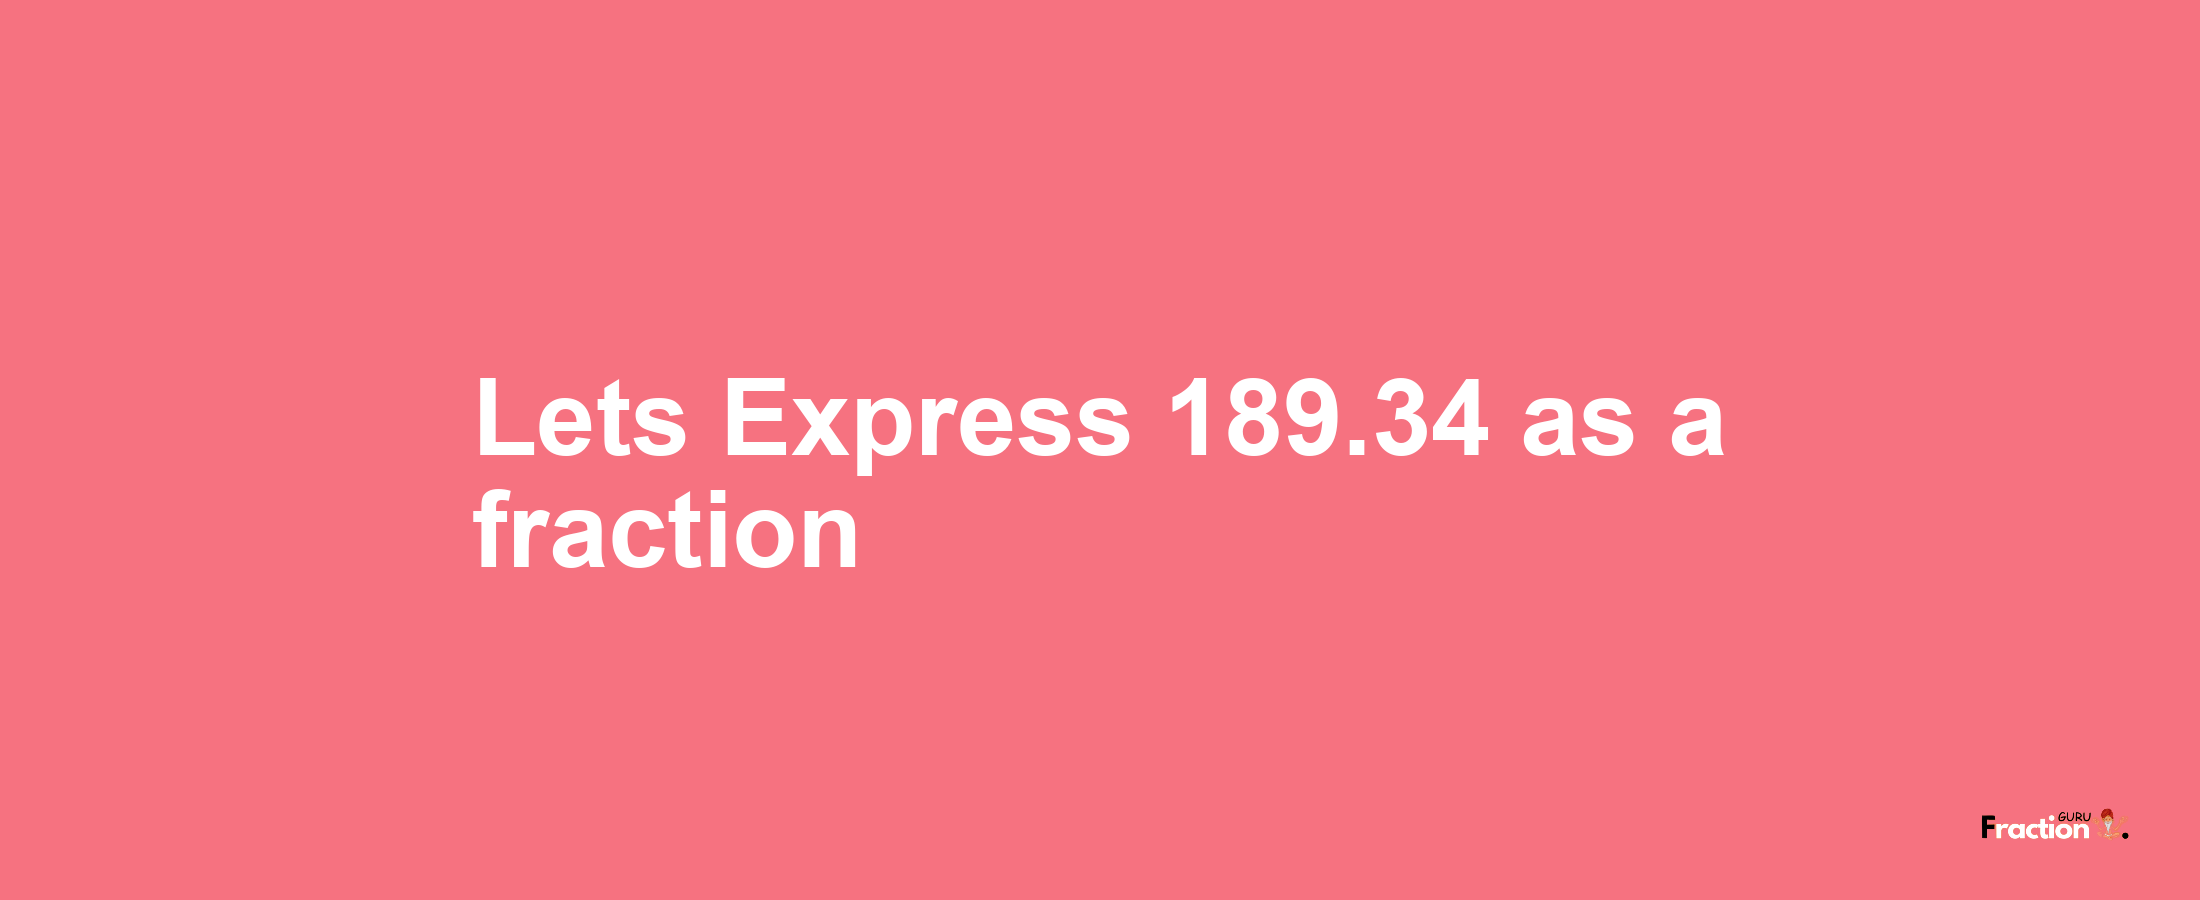 Lets Express 189.34 as afraction